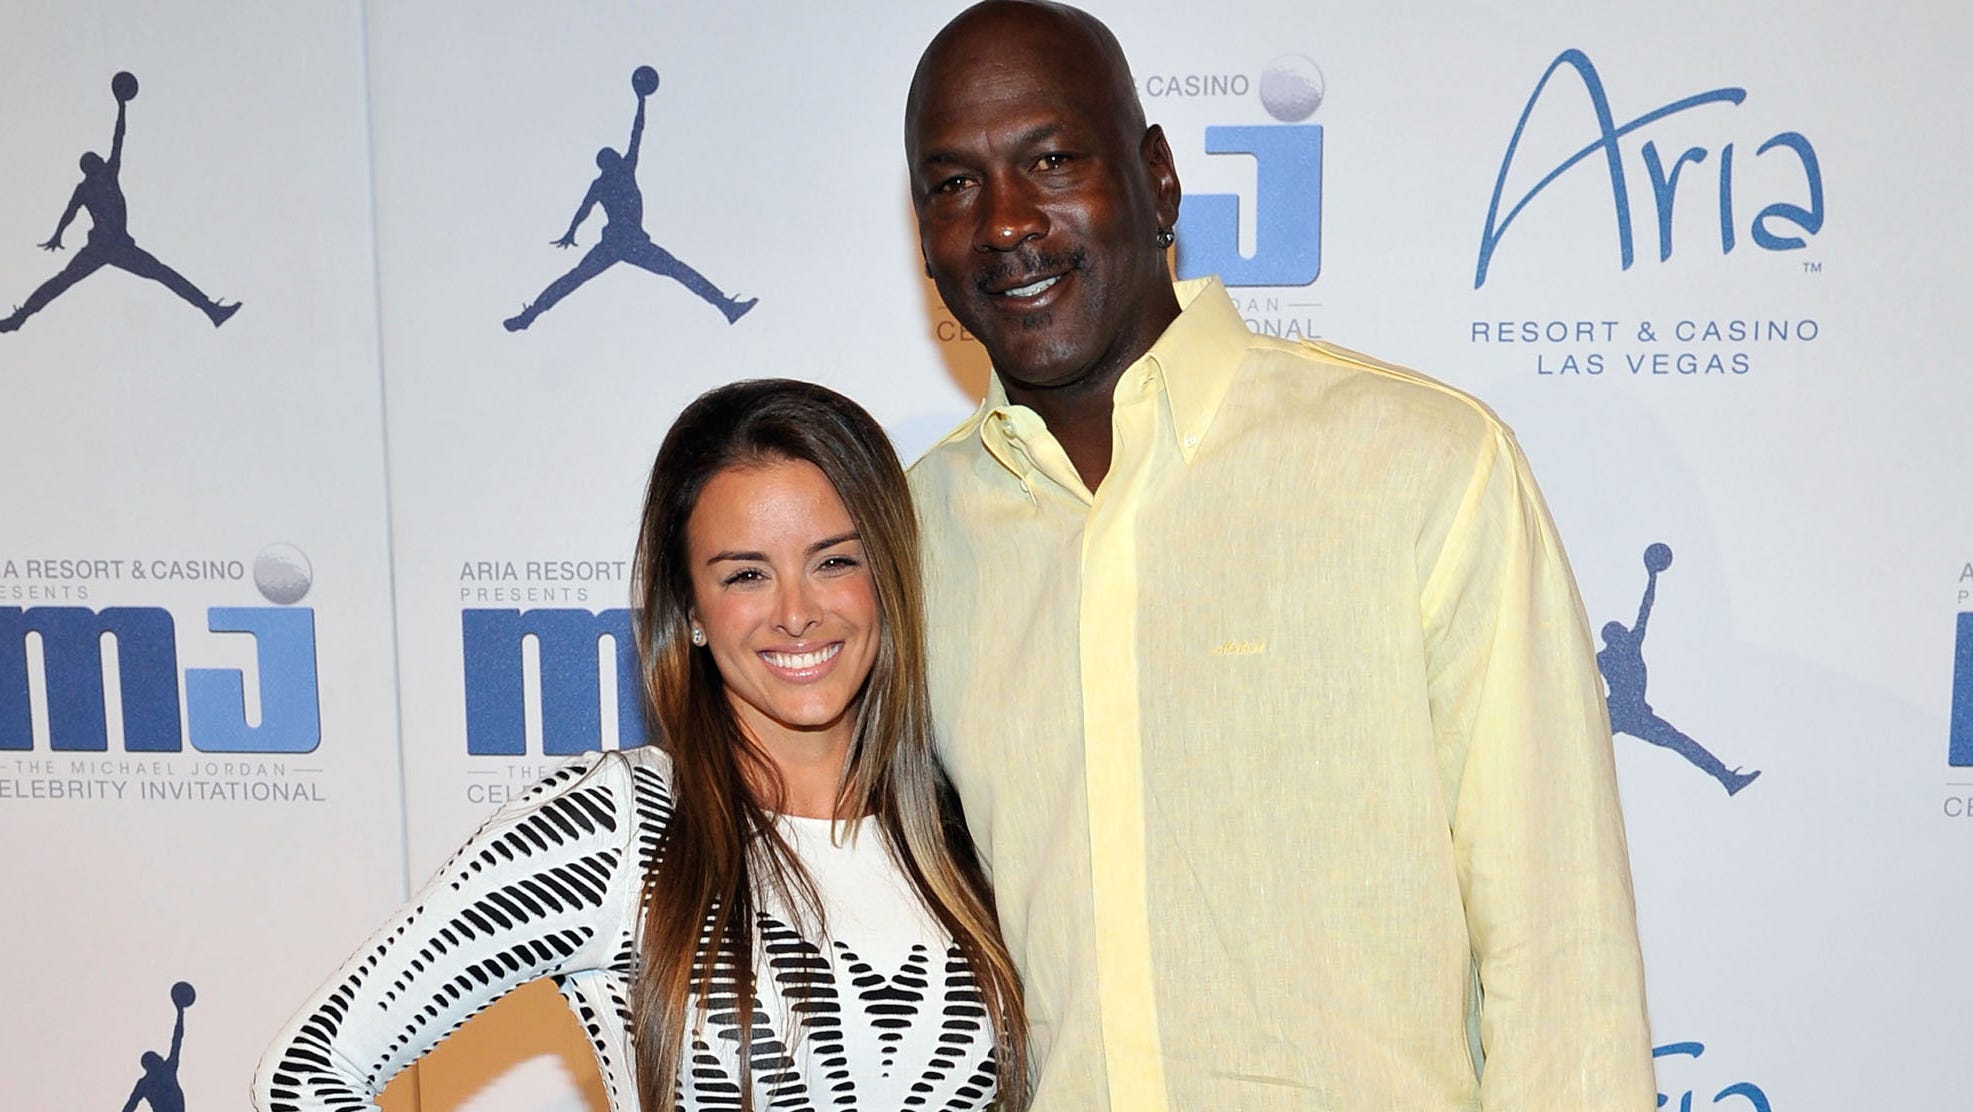 Michael Jordan is a family man, and he and his wife have five chιldren: Jeffrey, Marcus, Jasmine, Victoria, and Ysabel